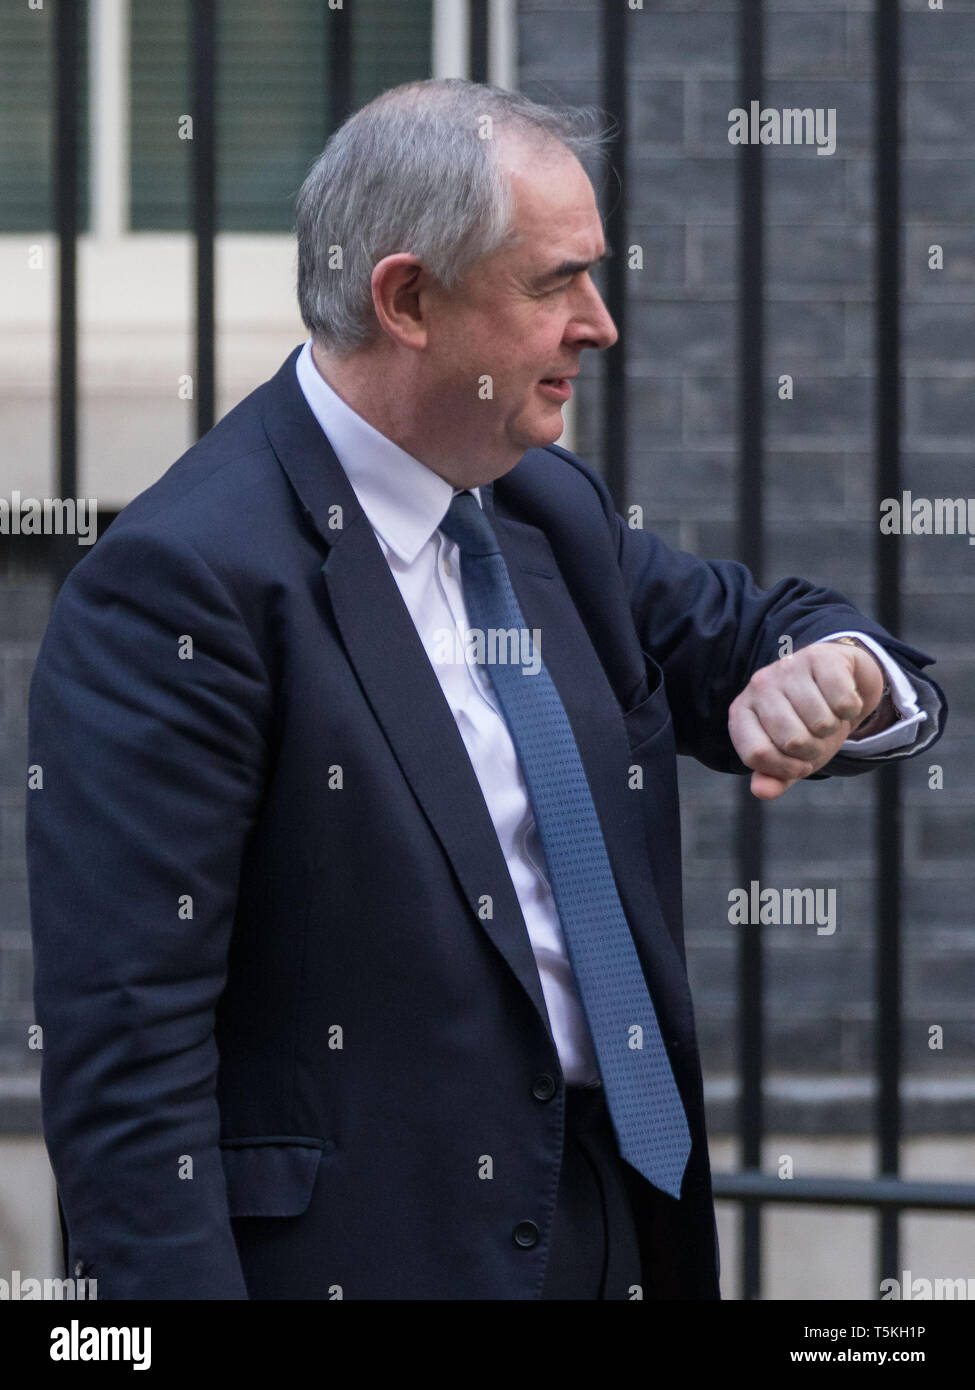 Ministers Depart Downing Street following cabinet meeting.  Featuring: Geoffrey Cox QC MP Where: London, United Kingdom When: 25 Mar 2019 Credit: Wheatley/WENN Stock Photo